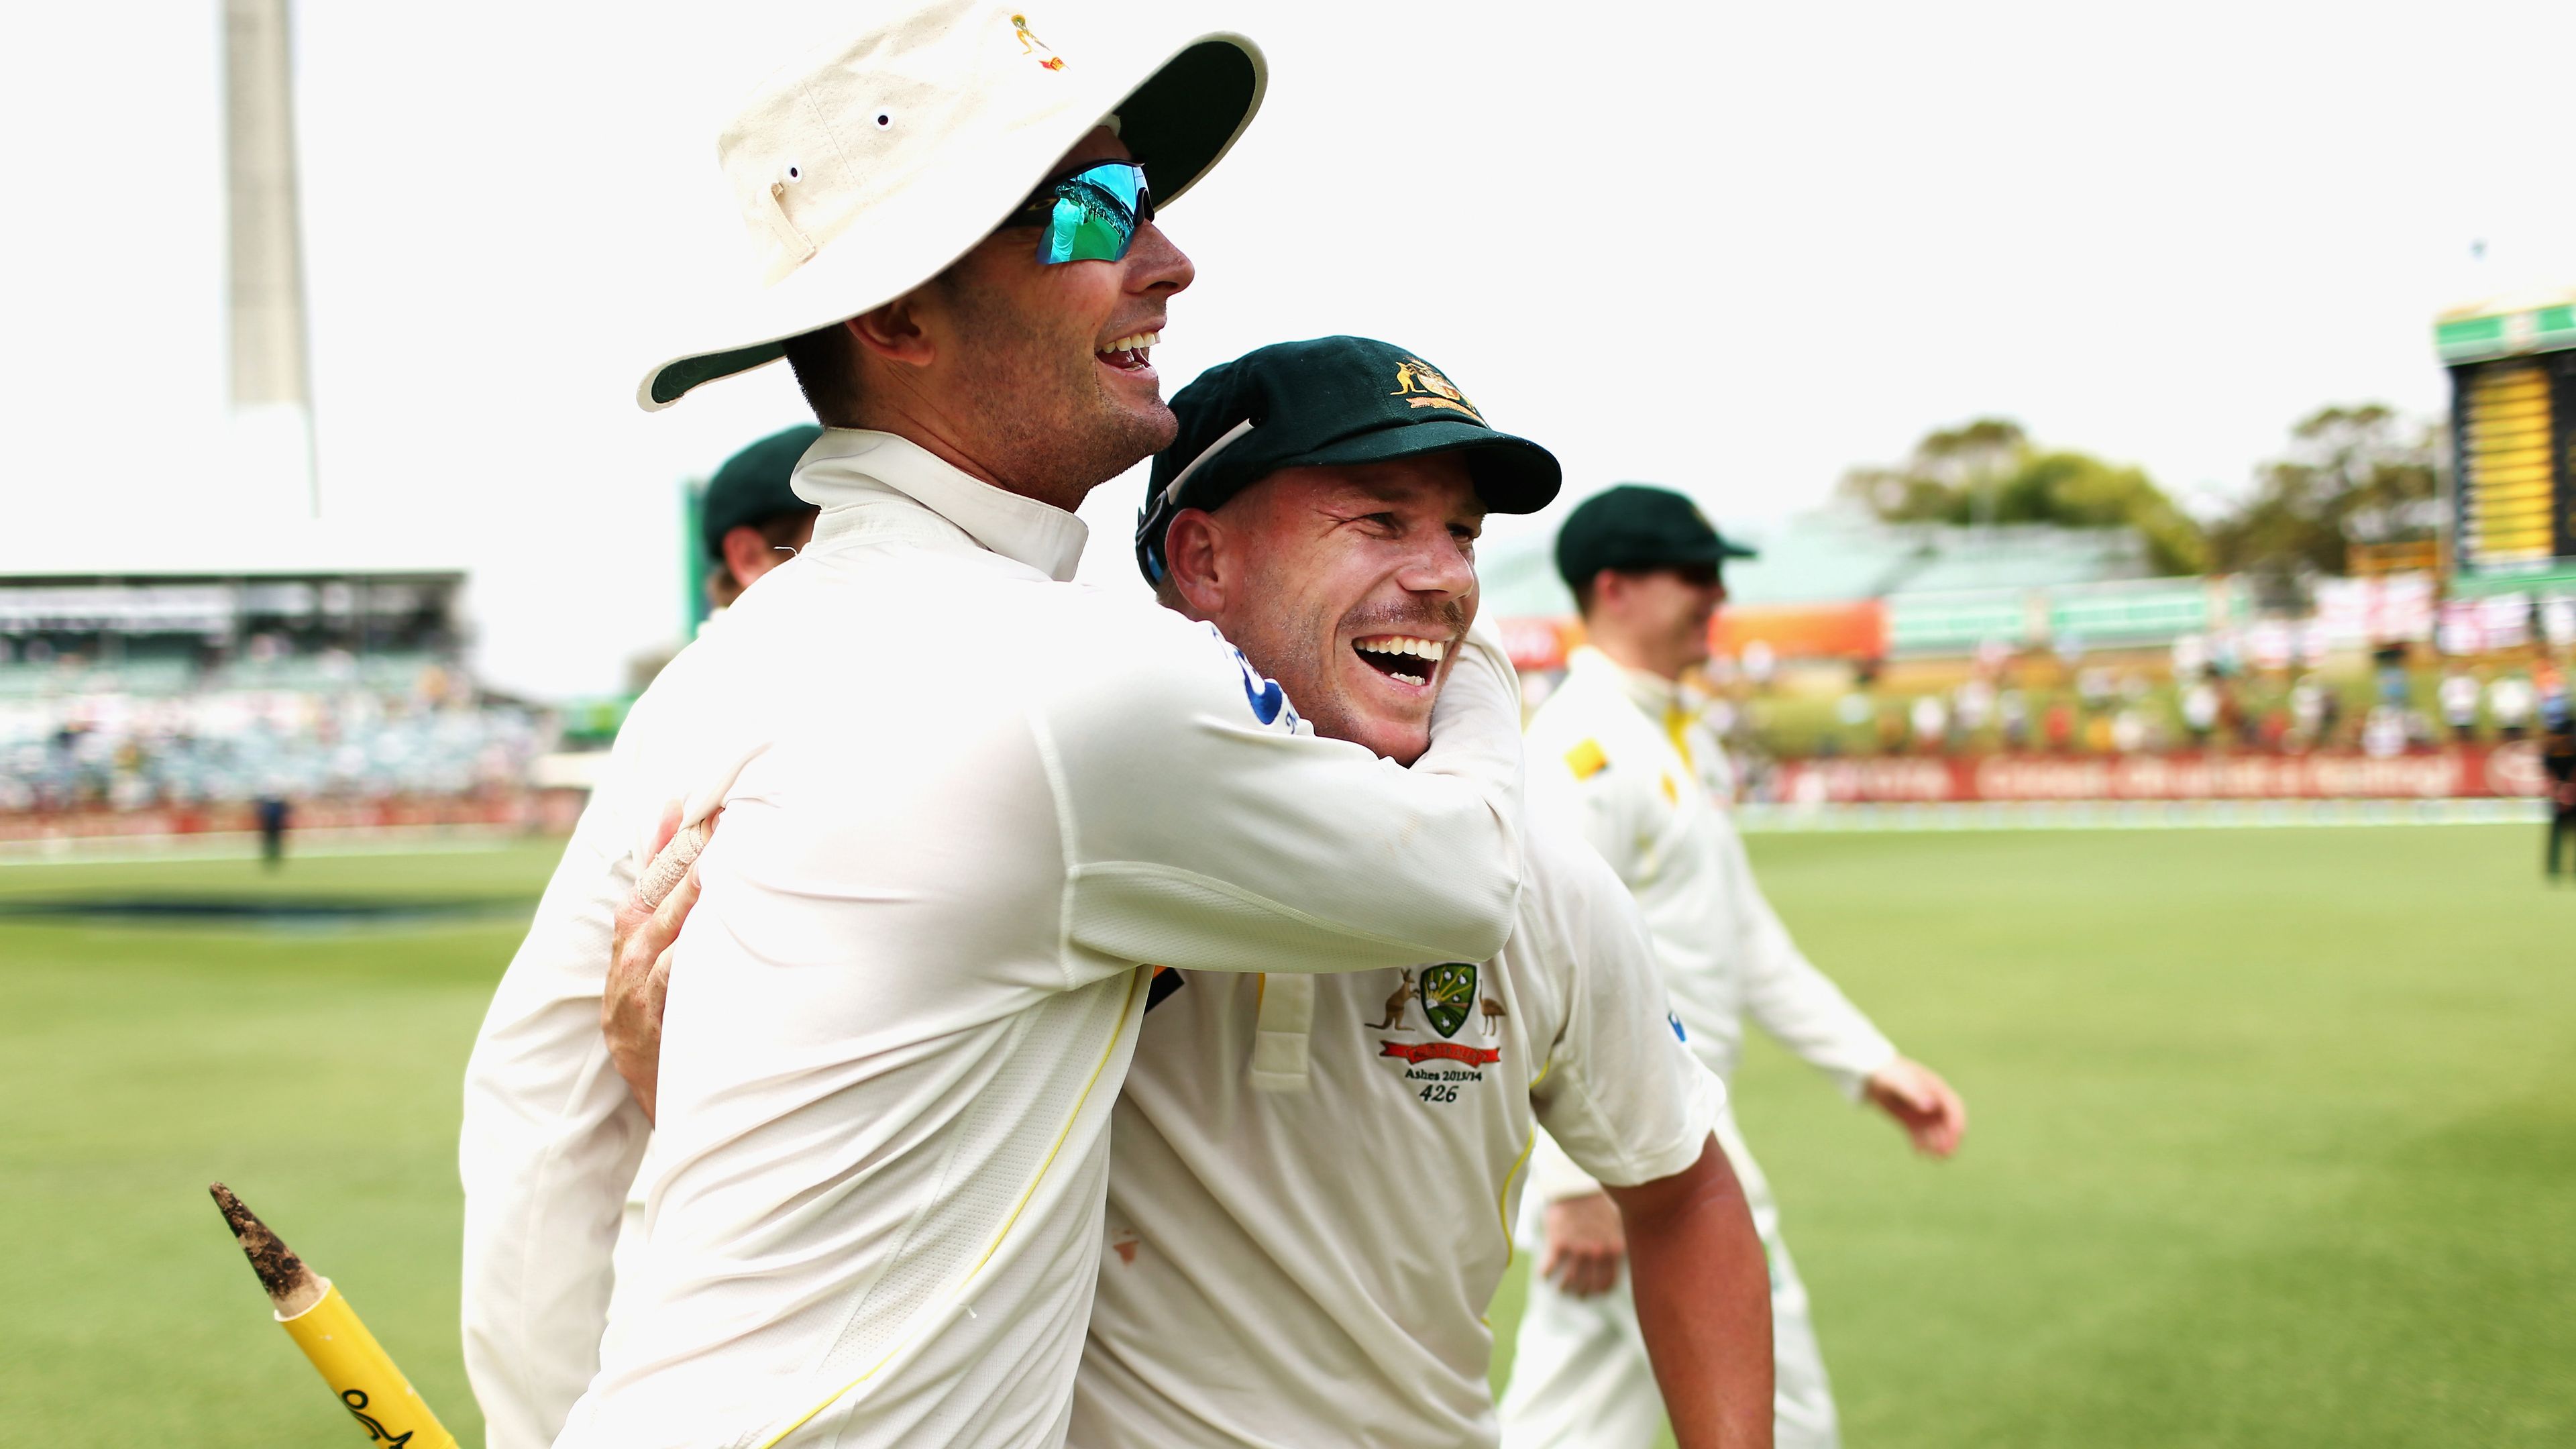 Michael Clarke and David Warner of Australia celebrate victory during day five of the Third Ashes Test Match between Australia and England at WACA on December 17, 2013 in Perth, Australia. (Photo by Ryan Pierse/Getty Images)